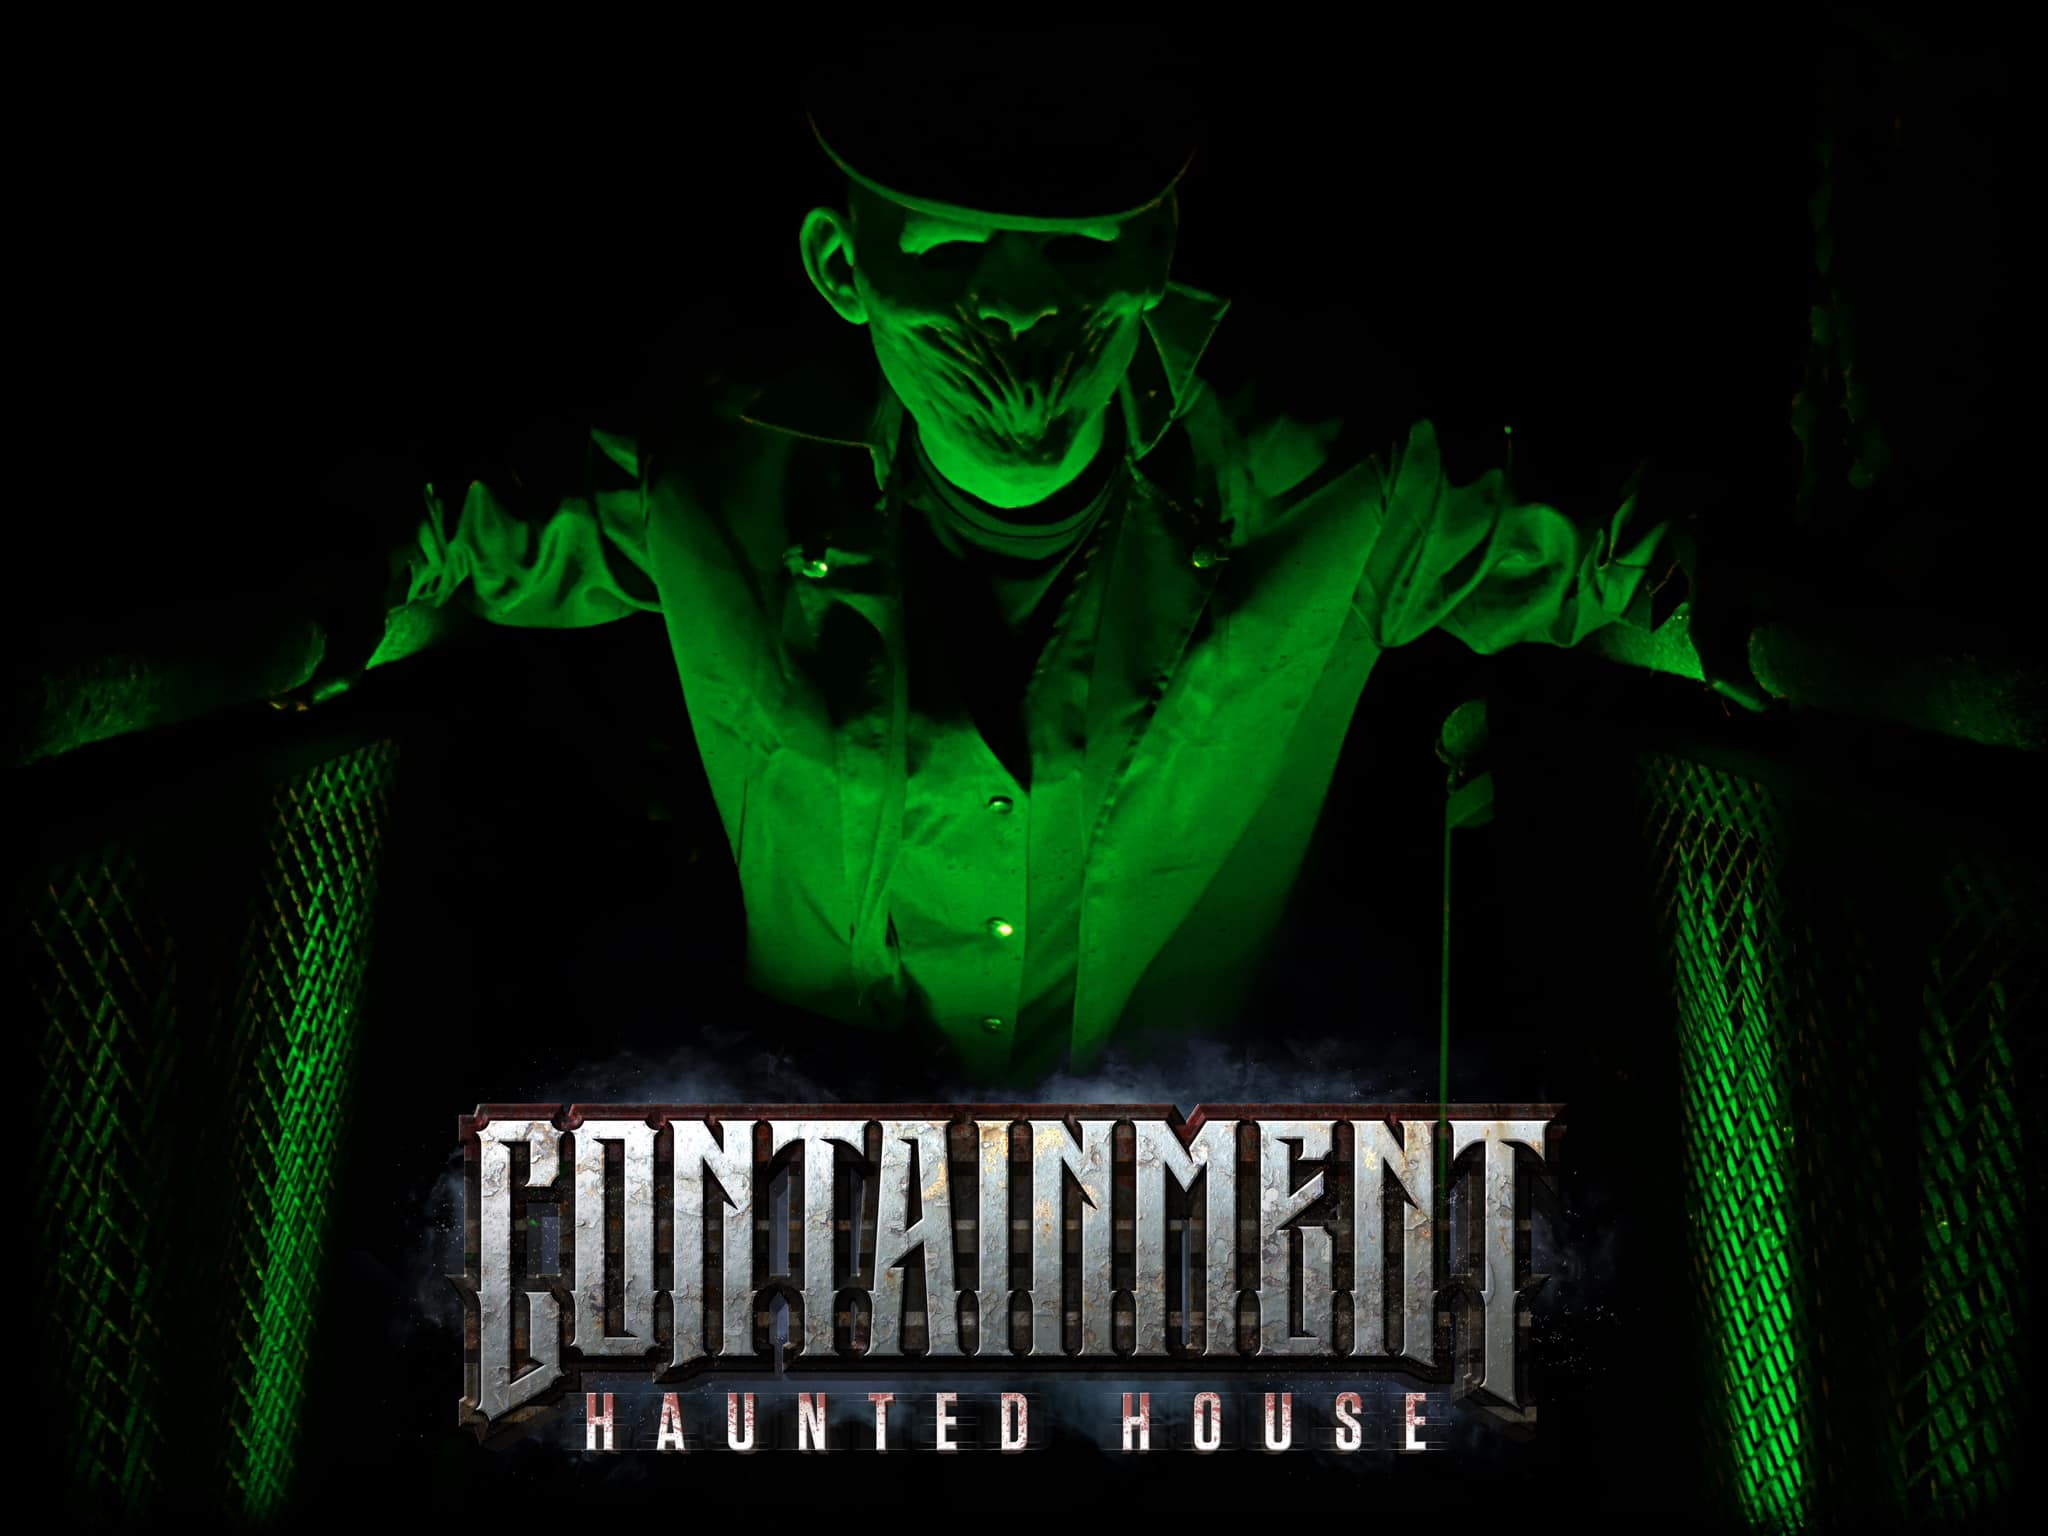 Containment Horror House